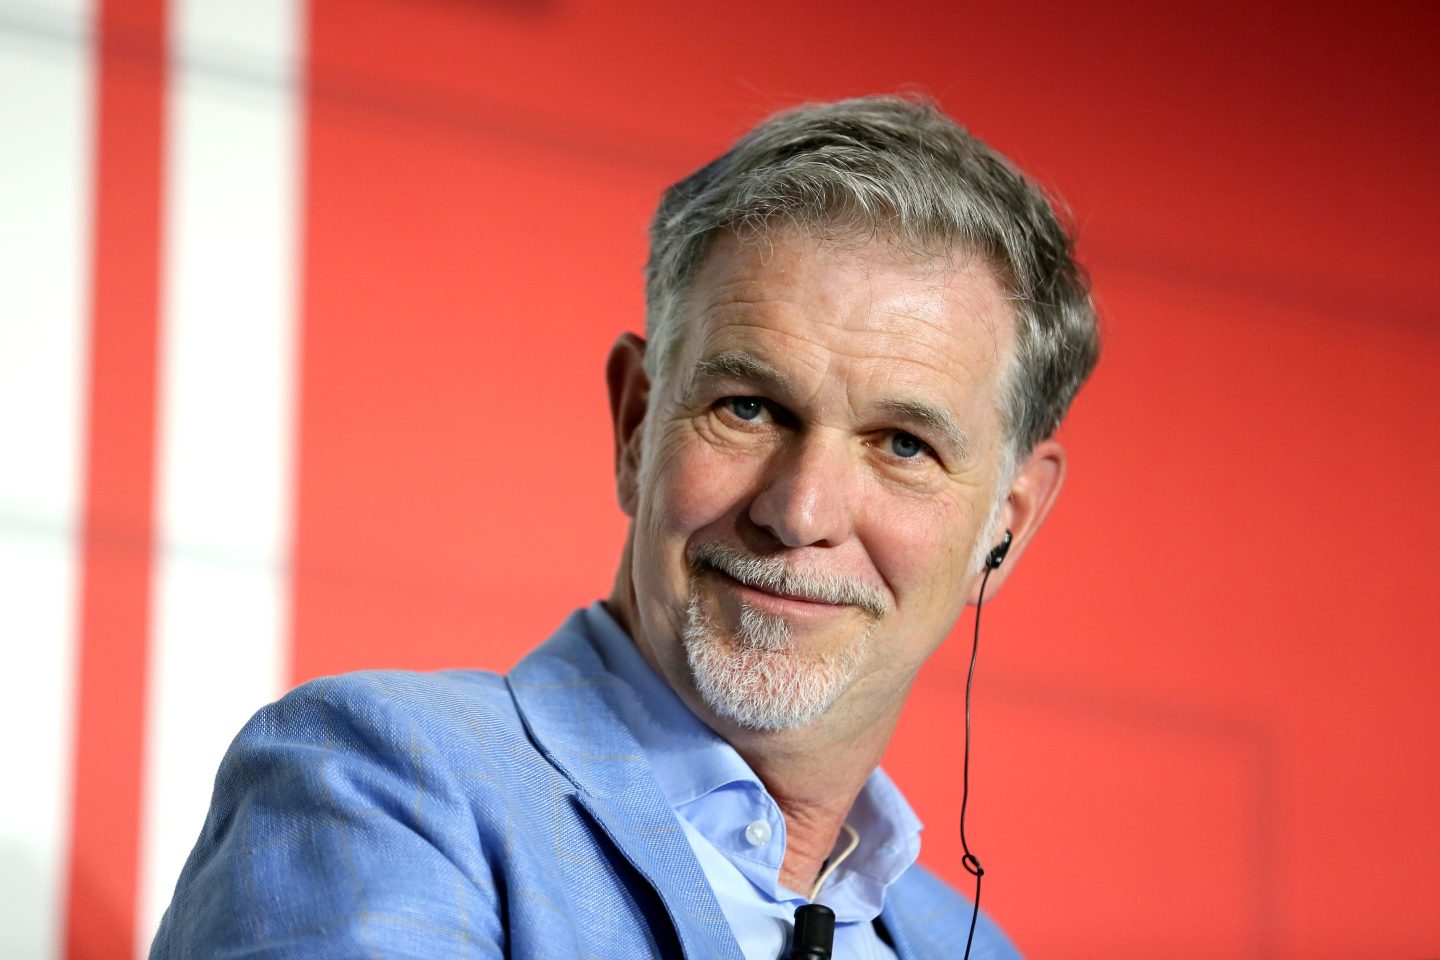 Reed Hastings attends an event